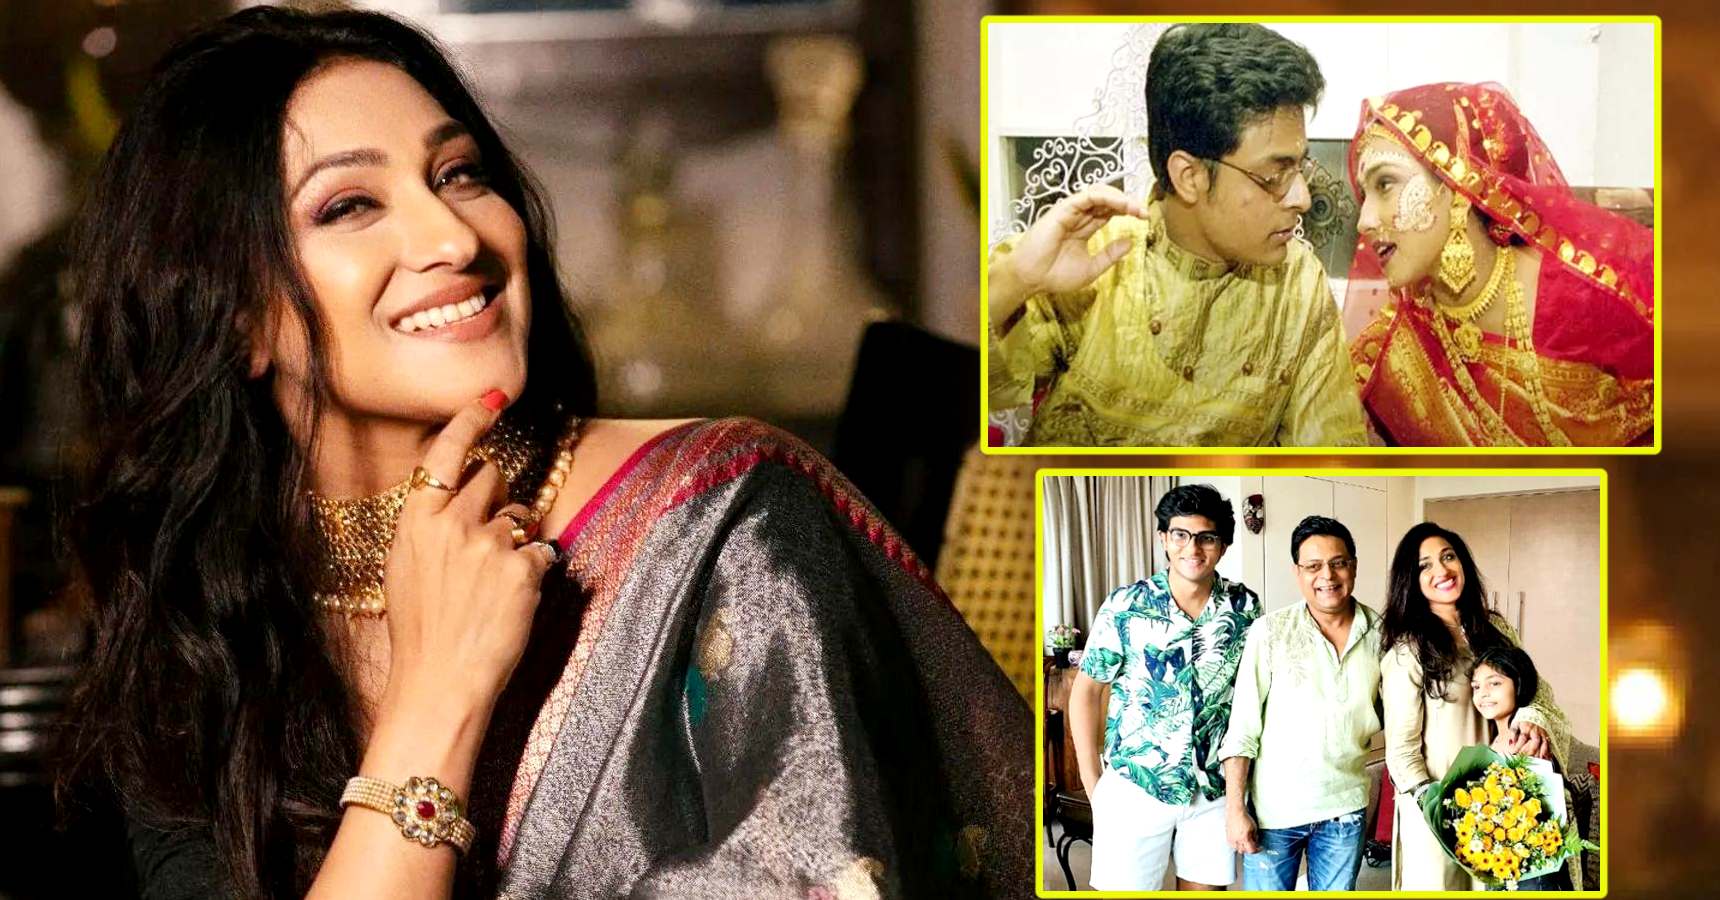 All you need to know about Tollywood actress Rituparna Sengupta family